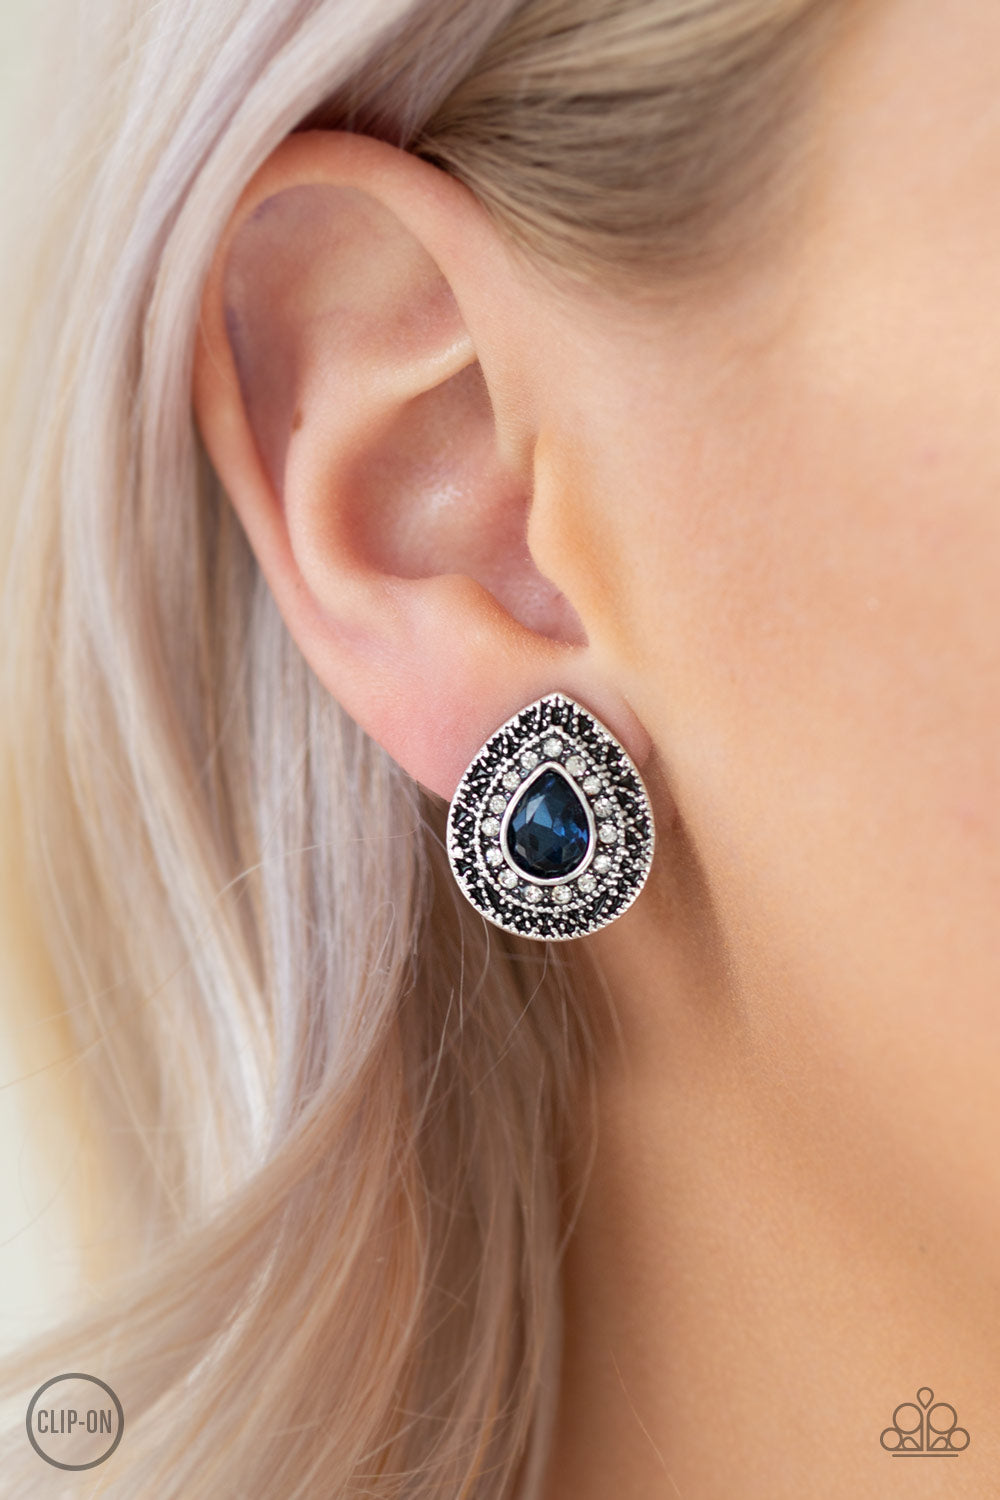 High Class Celebrity - blue - Paparazzi CLIP ON earrings